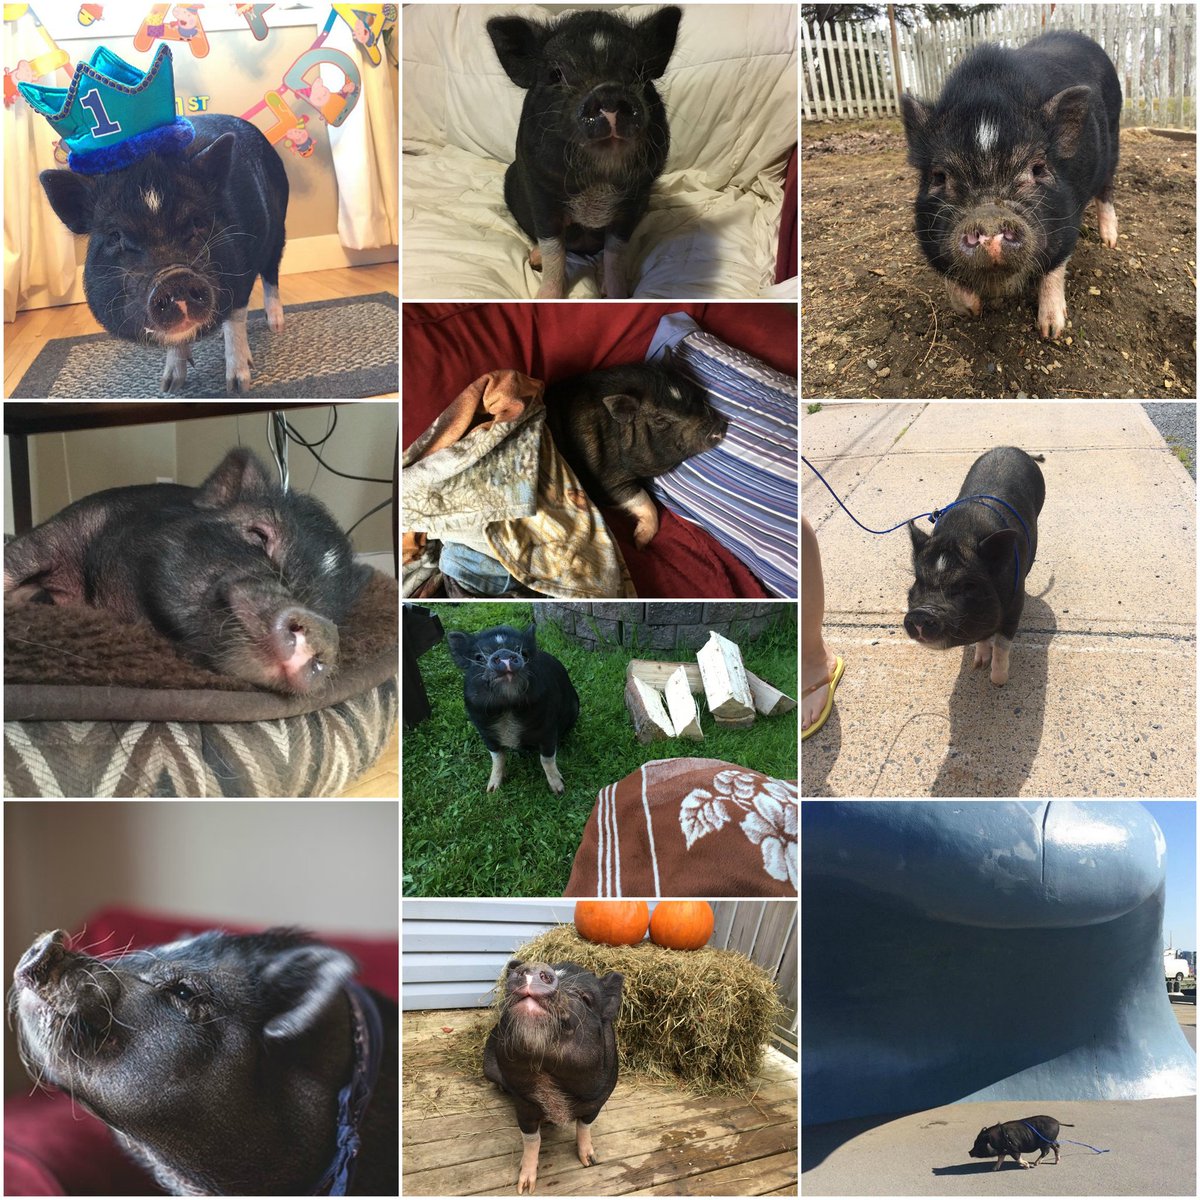 Tomorrow! 1pm-3pm....ERIK THE PIG COMES TO THE GALLERY!!!!!#Pigsoftwitter #halifaxns #art #babyanimals #SaturdayMotivation